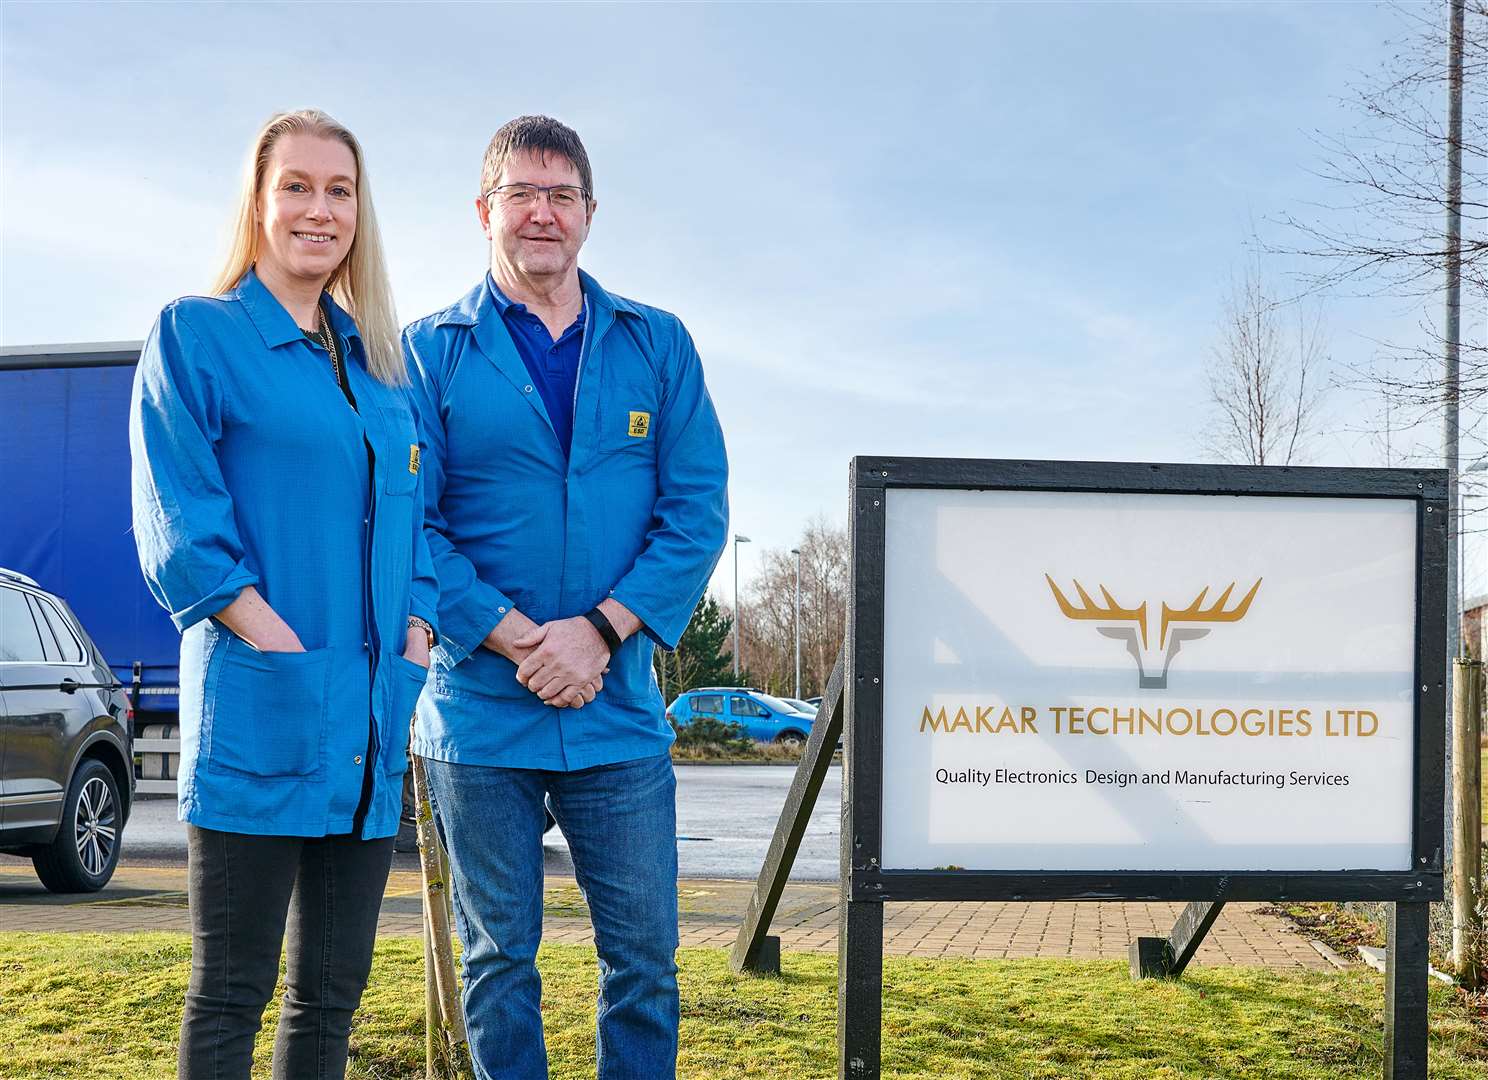 Makar Technologies has gone from 4 employees to 40 since its inception in 2015. Picture: Gary Murison